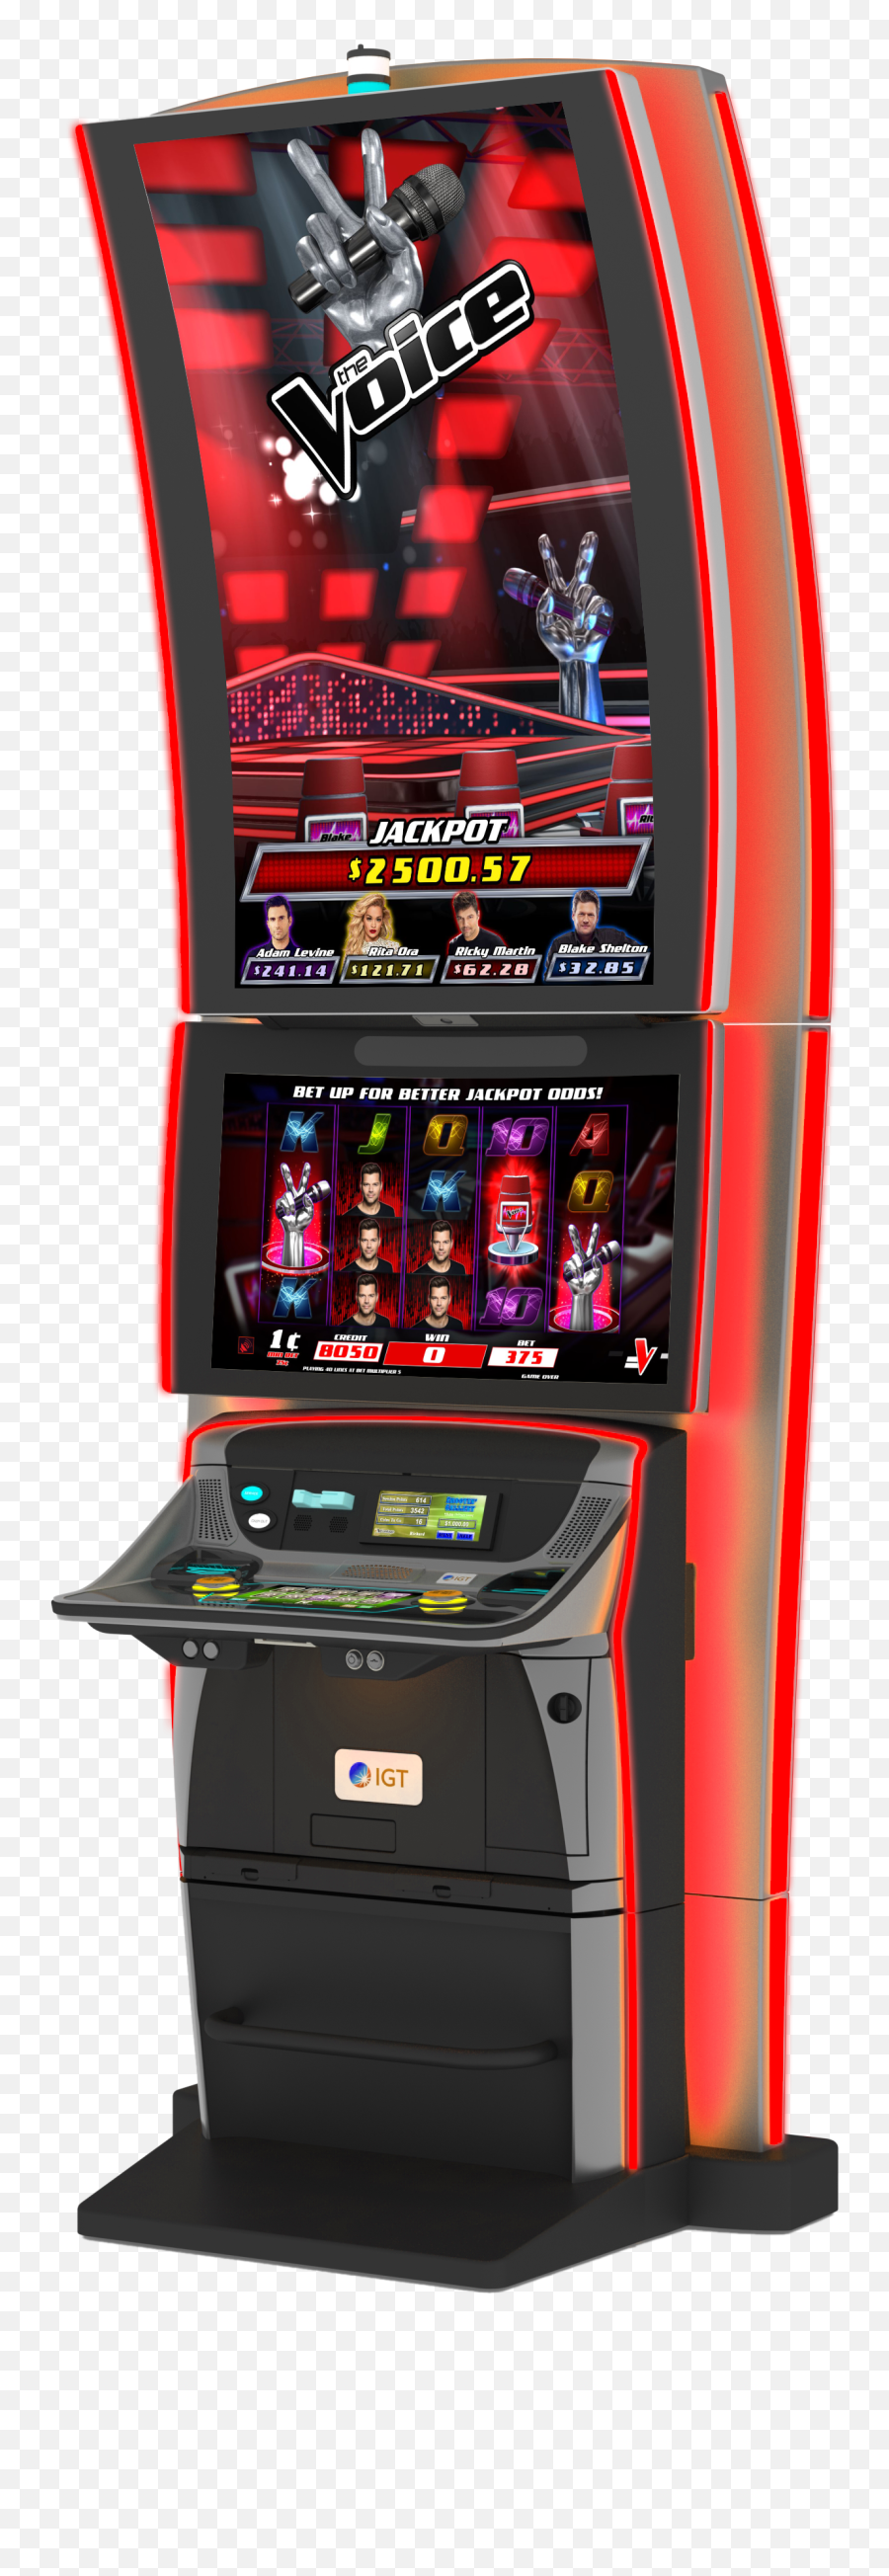 Slots - Voice Casino Slot Machine Emoji,Game To See How Fast You Can Text Emoticons Slot Machine